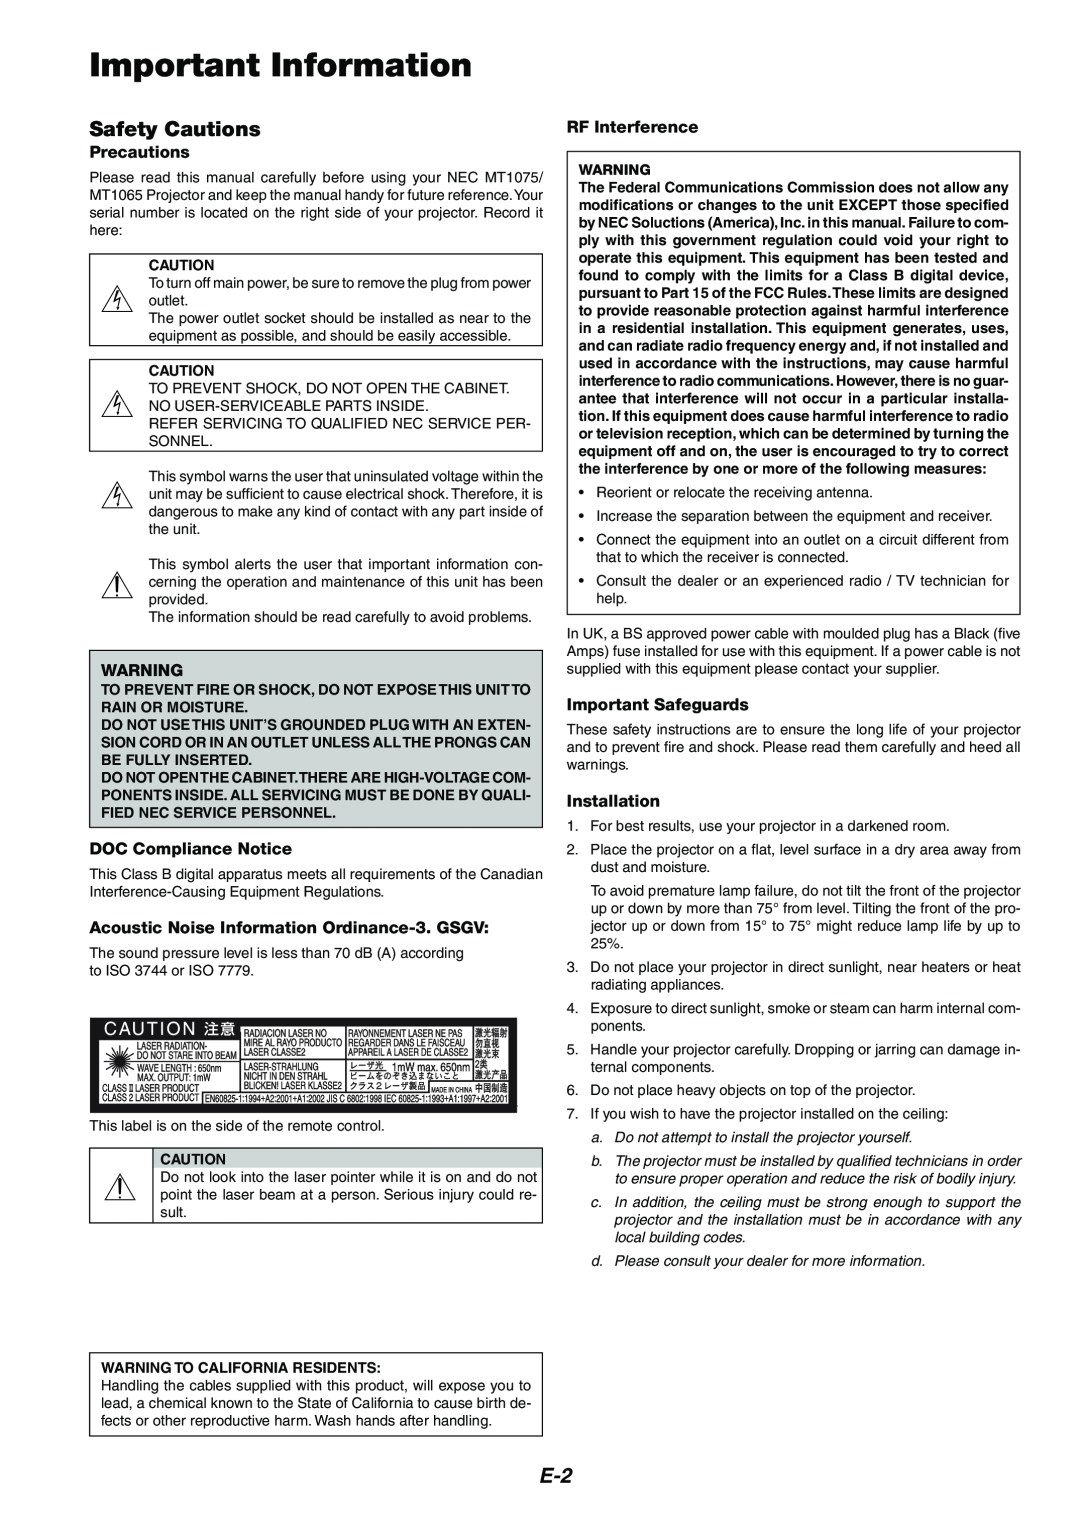 Kensington MT1075, MT1065 Important Information, Safety Cautions, Precautions, DOC Compliance Notice, RF Interference 